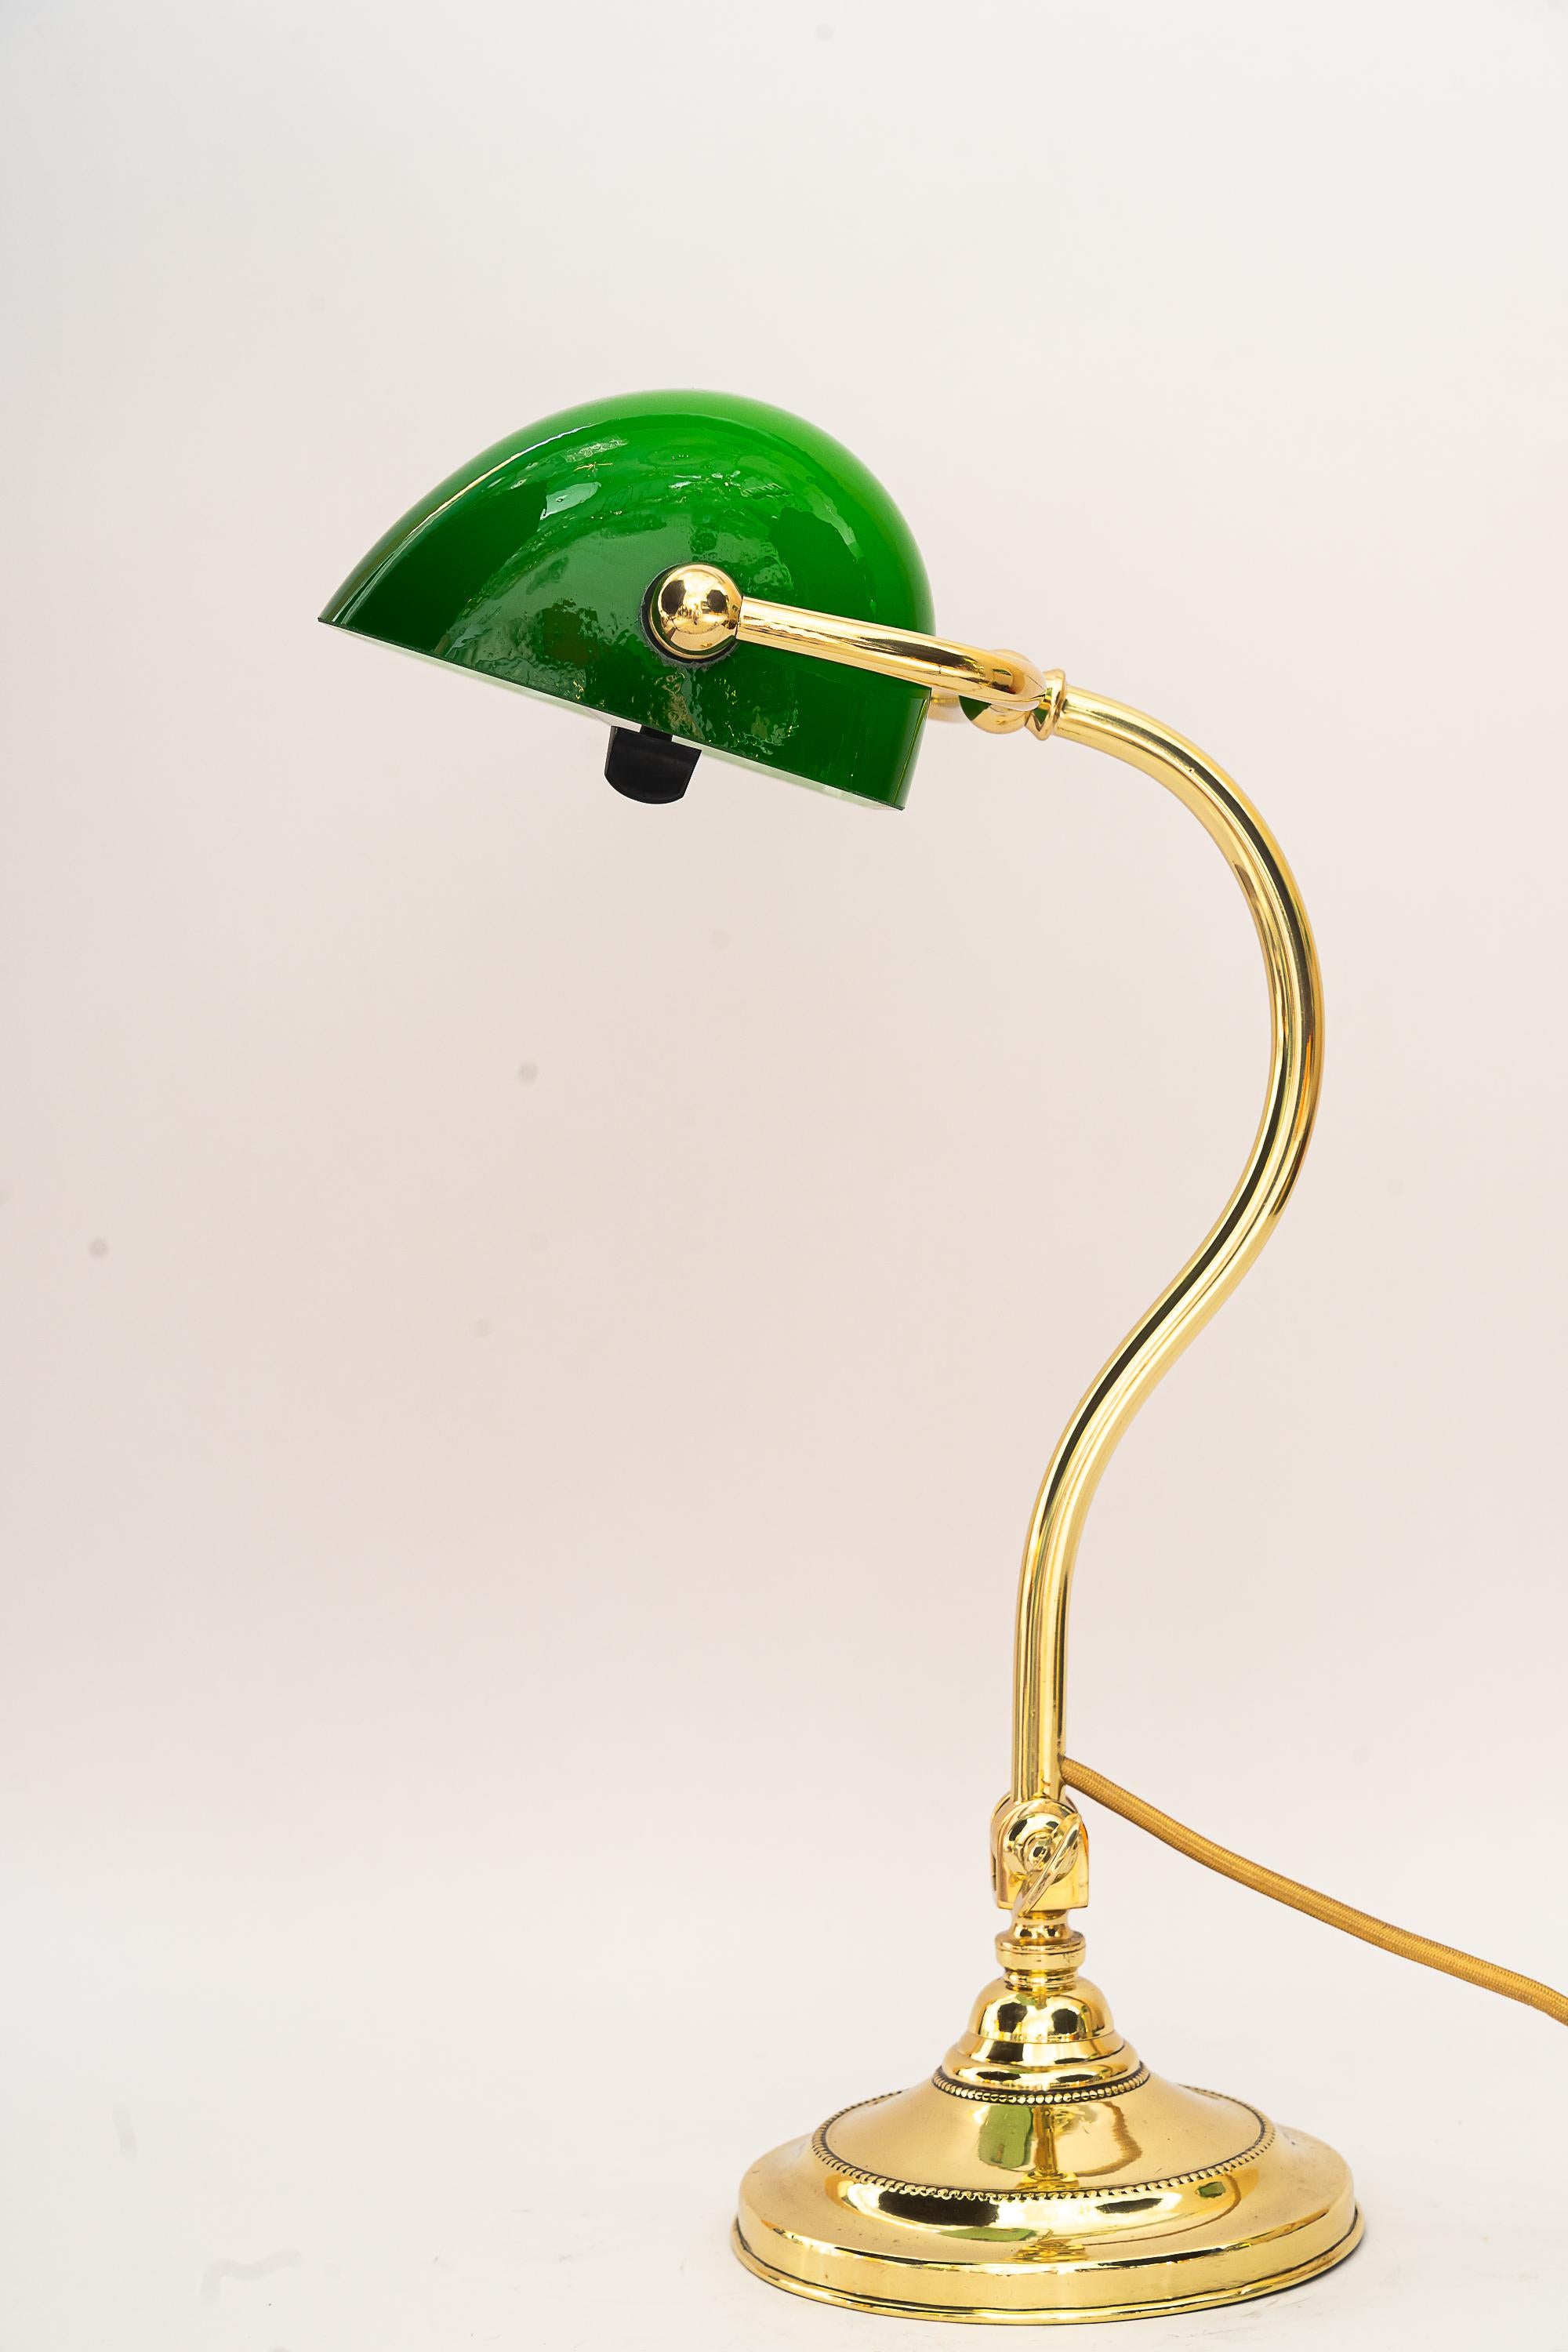 Adjustable Banker lamp around 1920s
Polished and stove enameled
Deep from 25cm up to 42cm